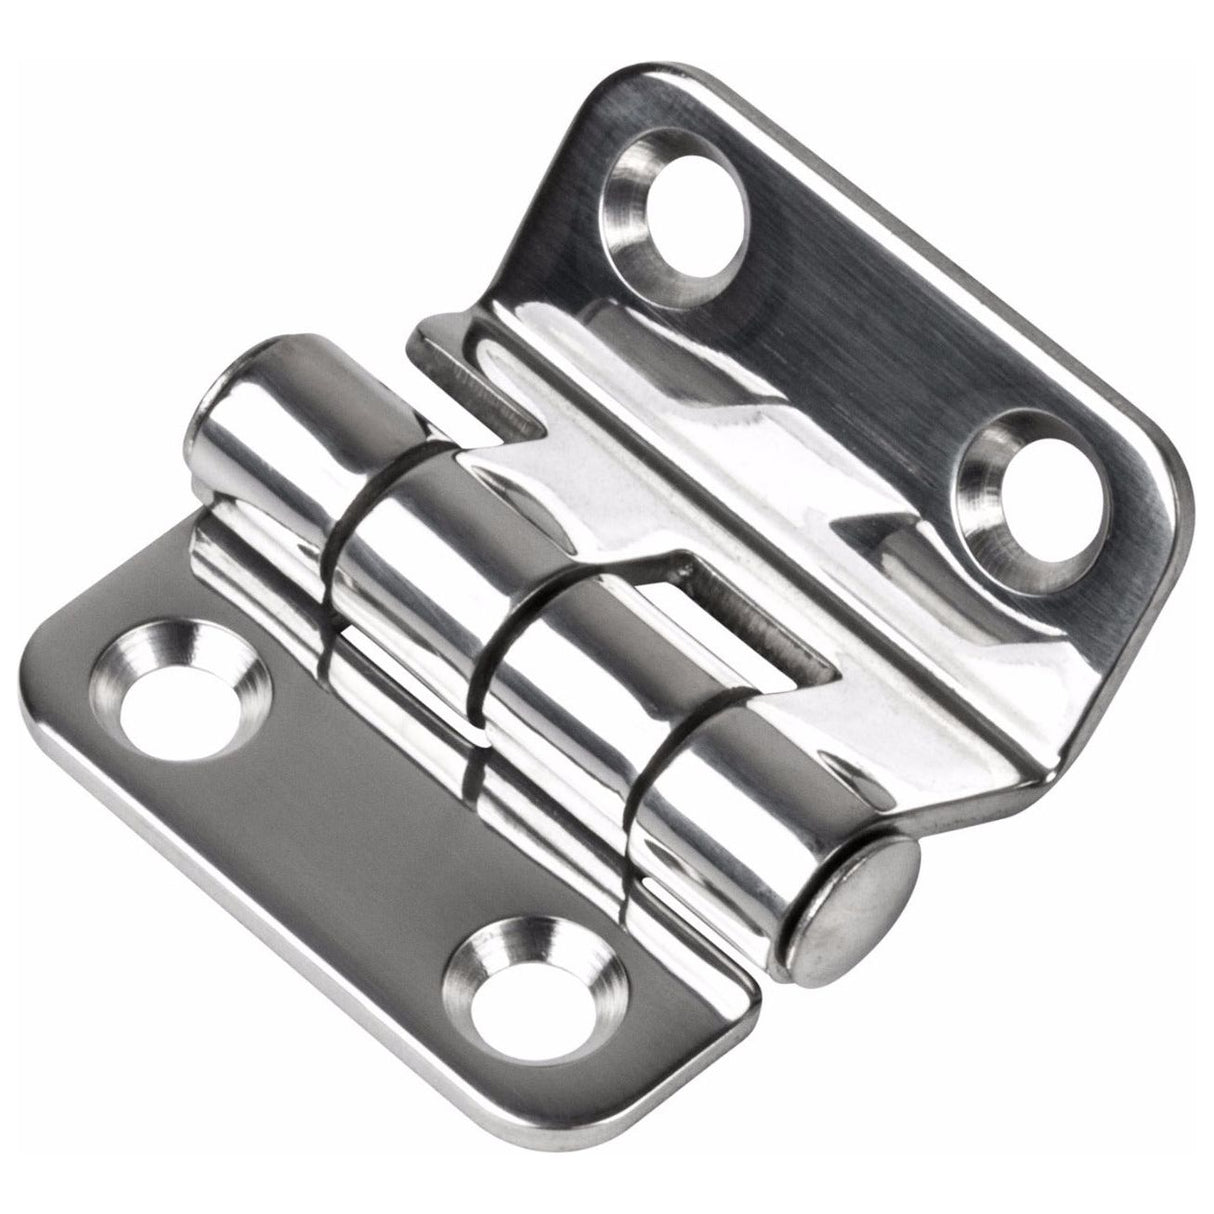 Stainless Steel Hinge 3/8" Offset